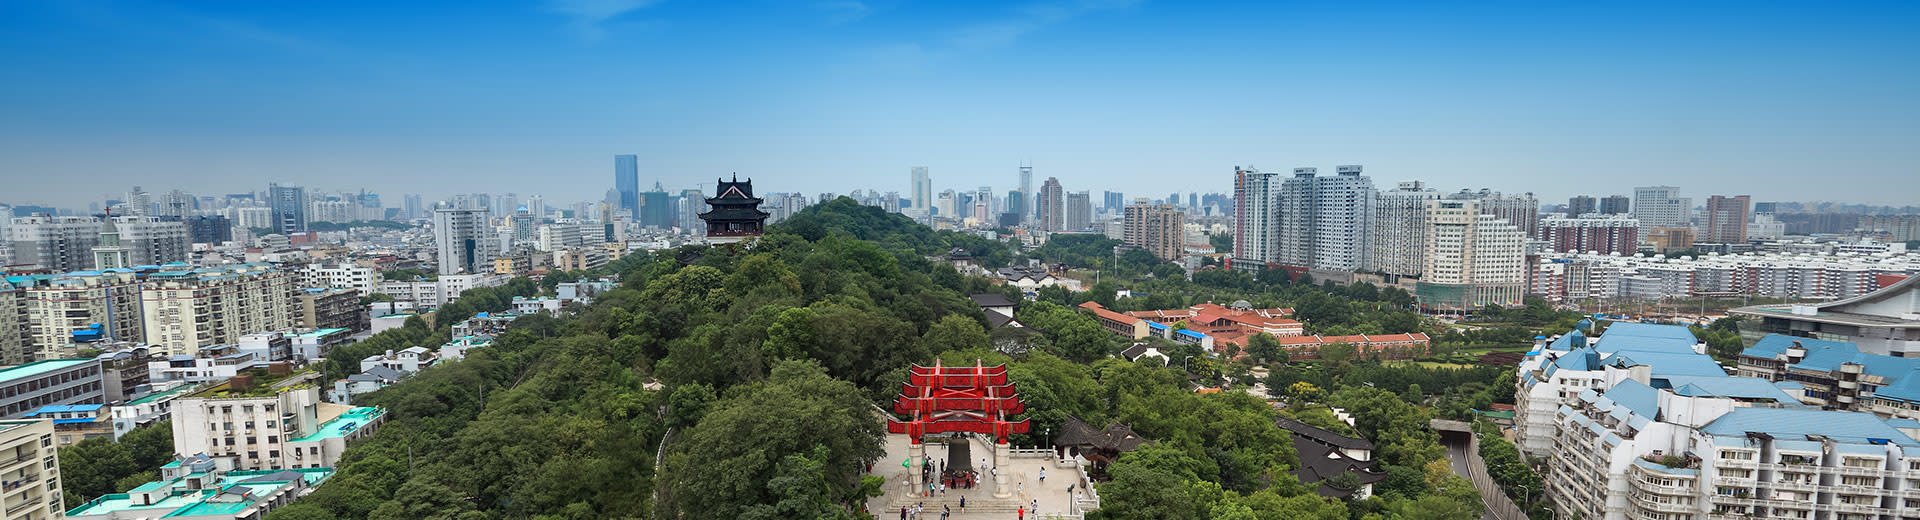 Blue skies above a green park and the sprawling city of Wuhan.